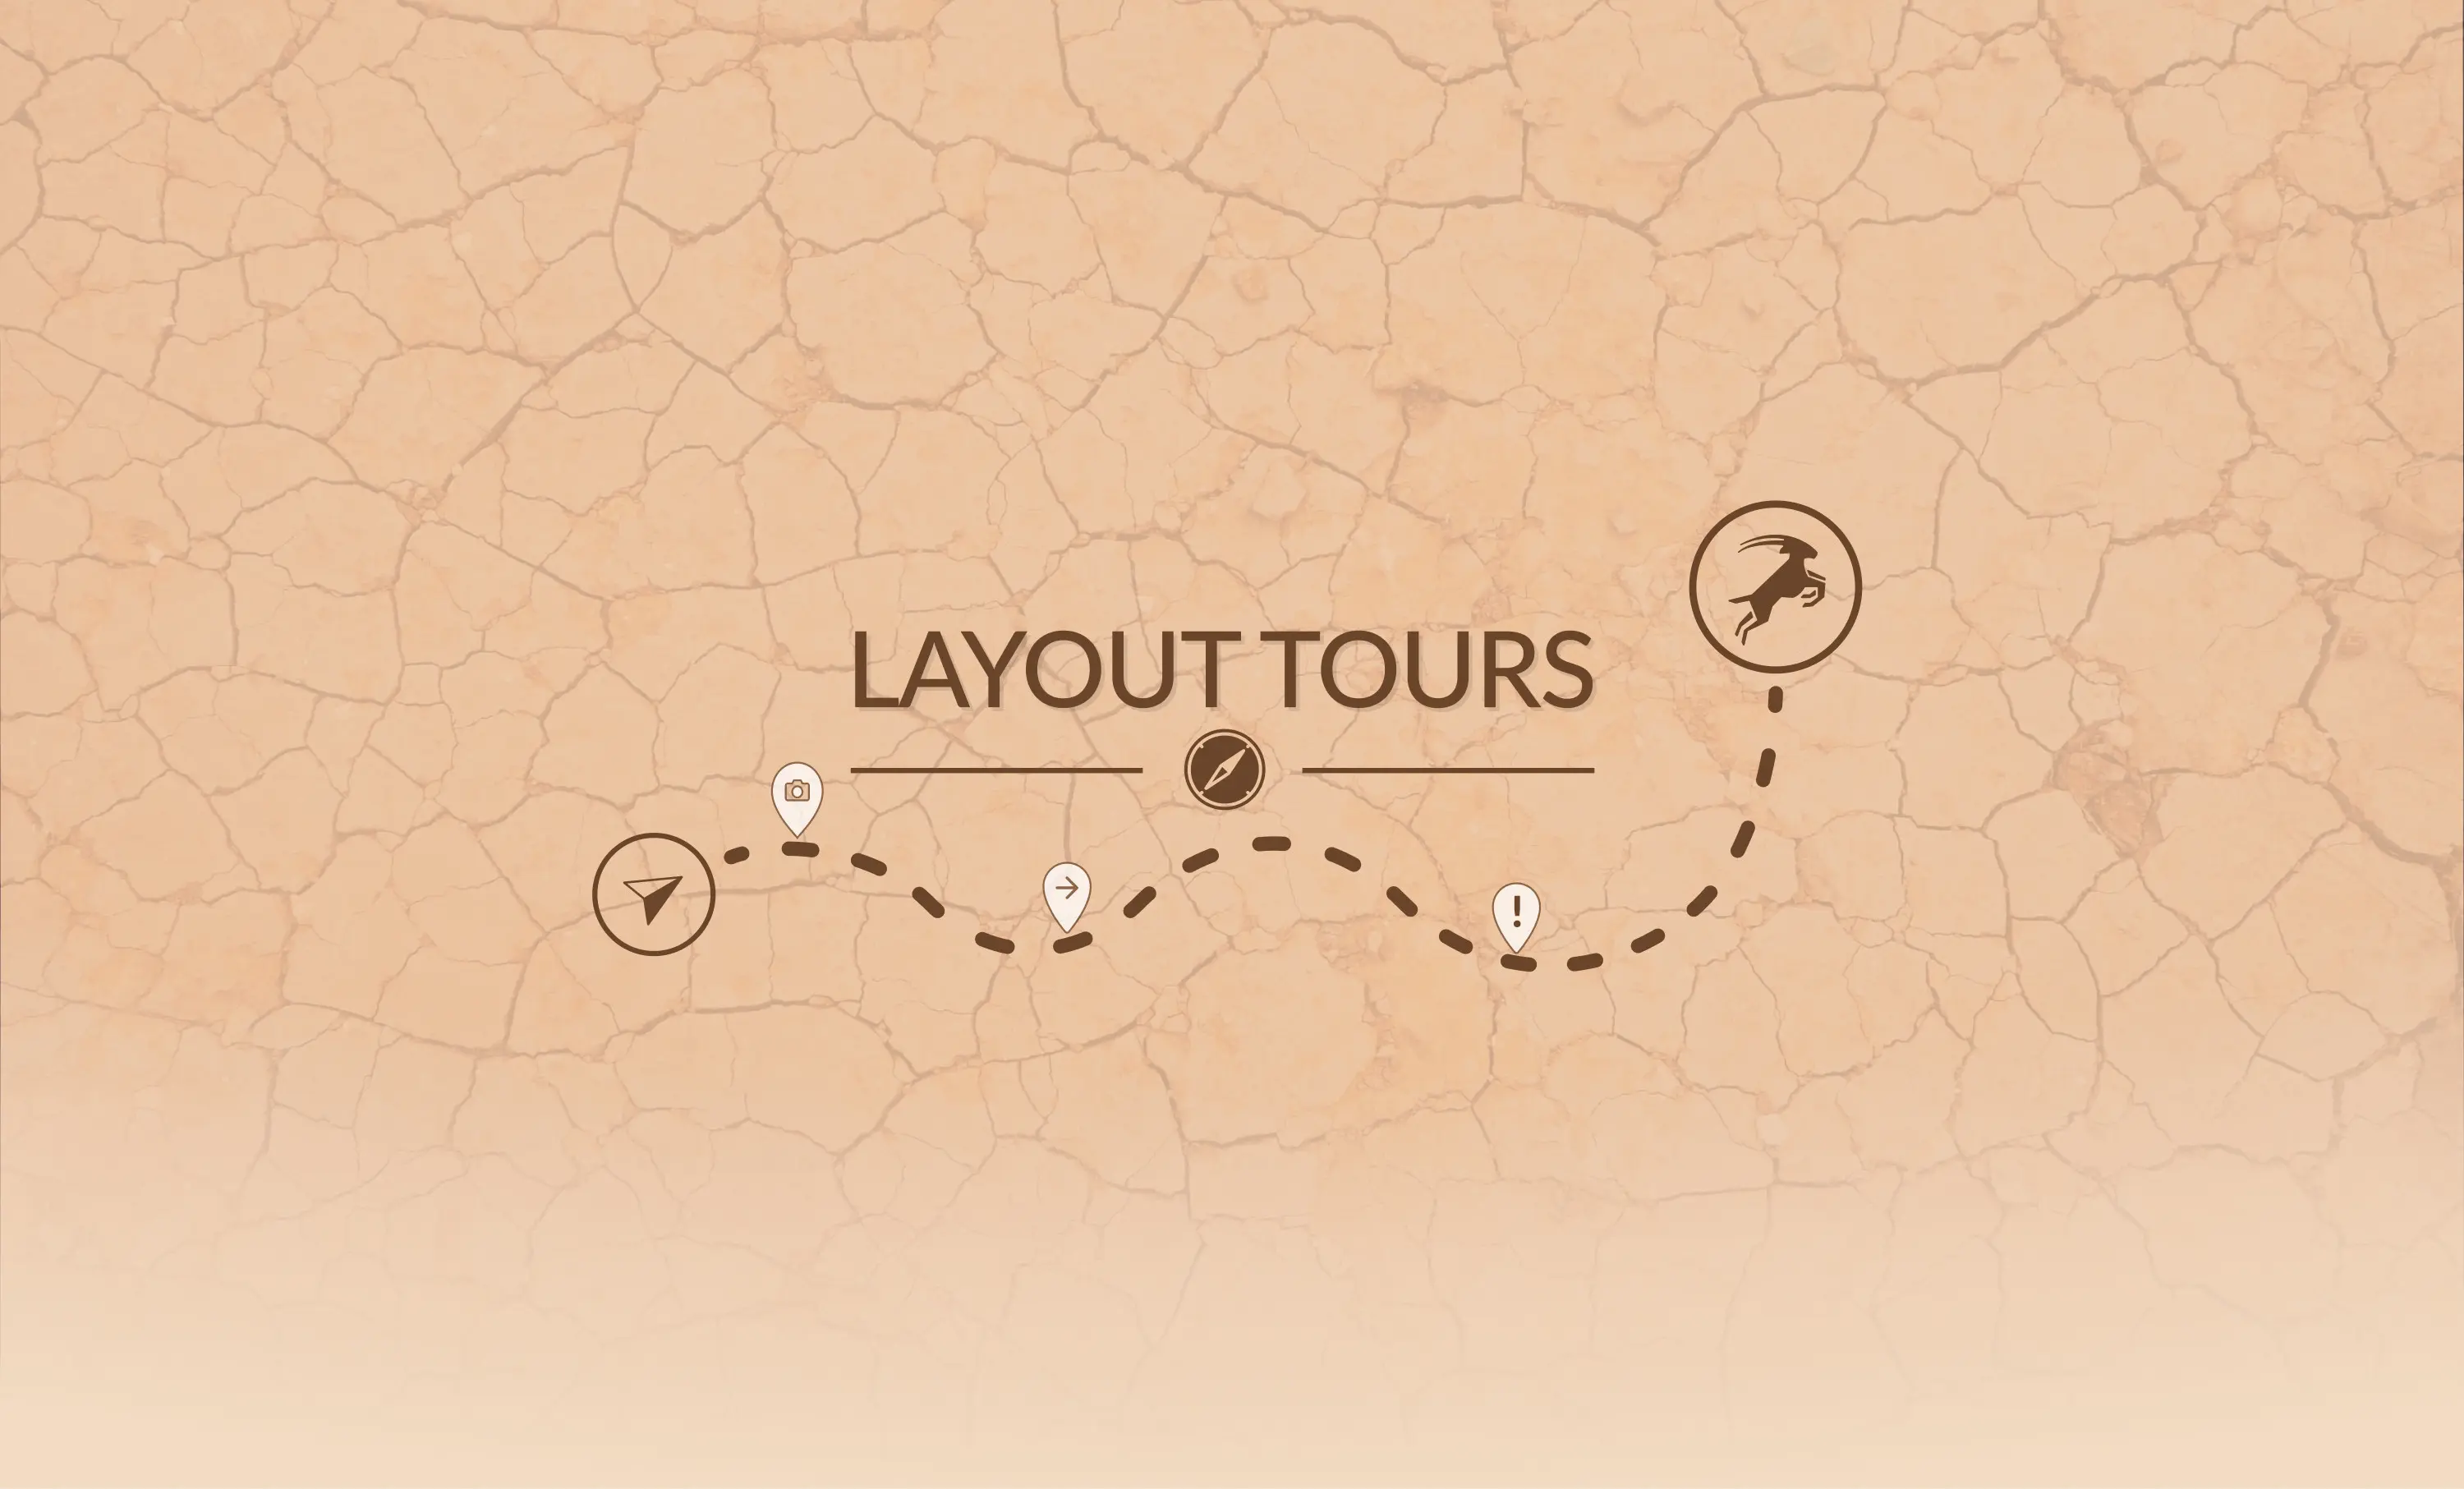 Introducing Layout Tours